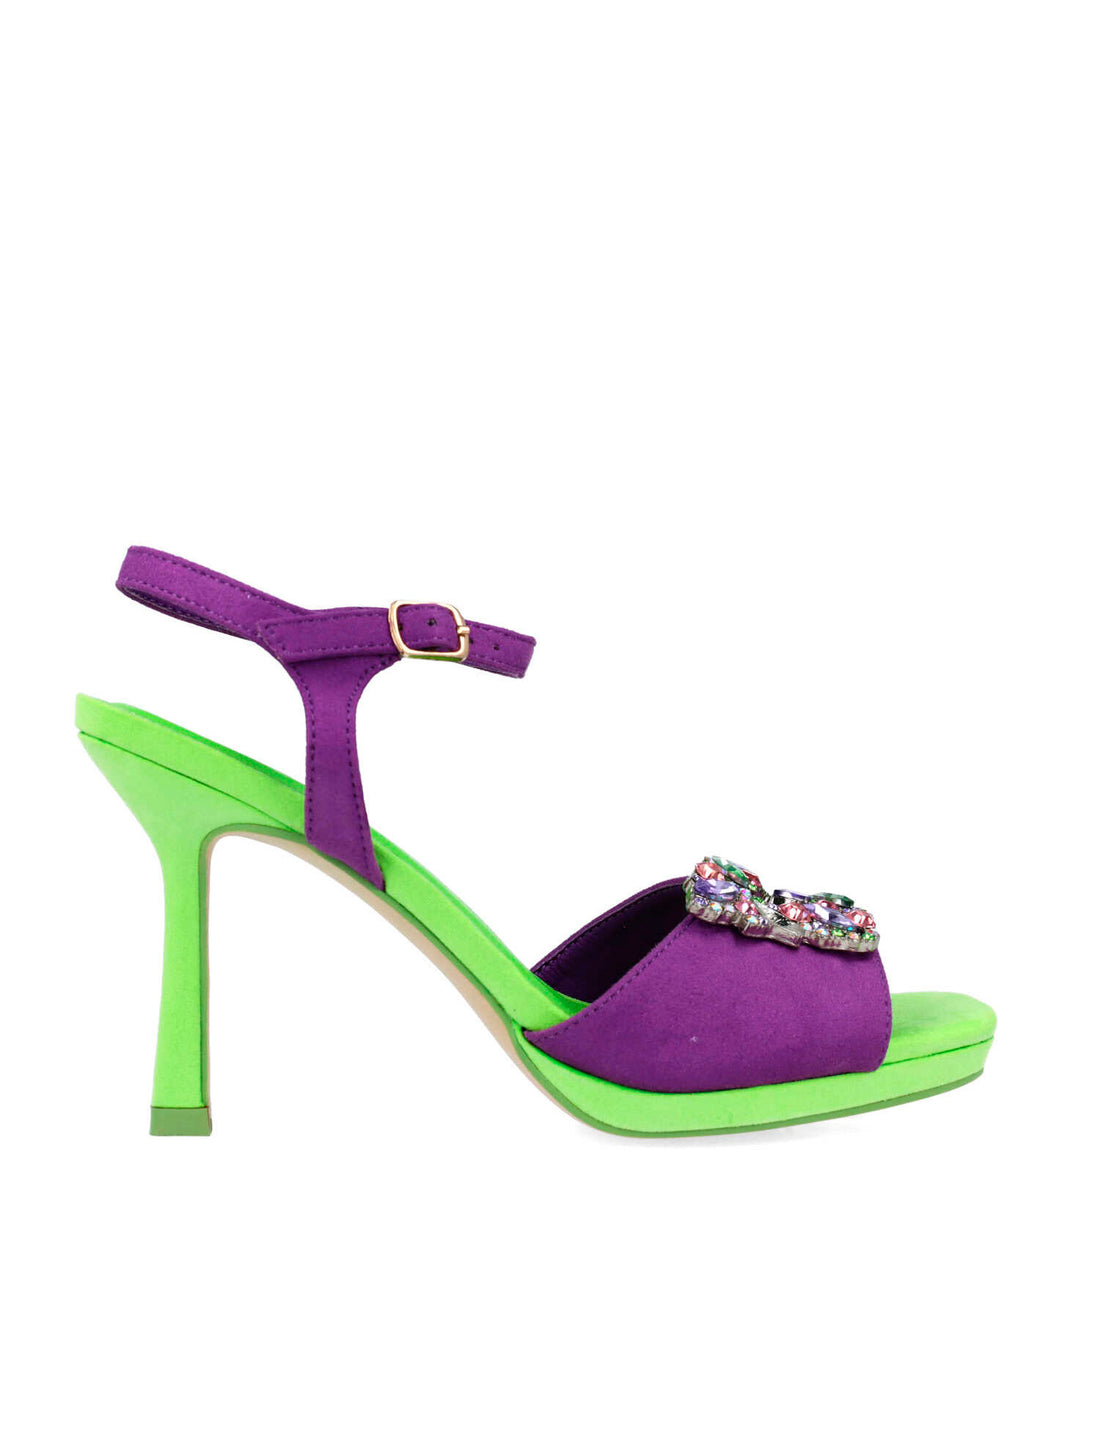 Multi-Color High-Heel Sandals With Embellishment_25259_08_01